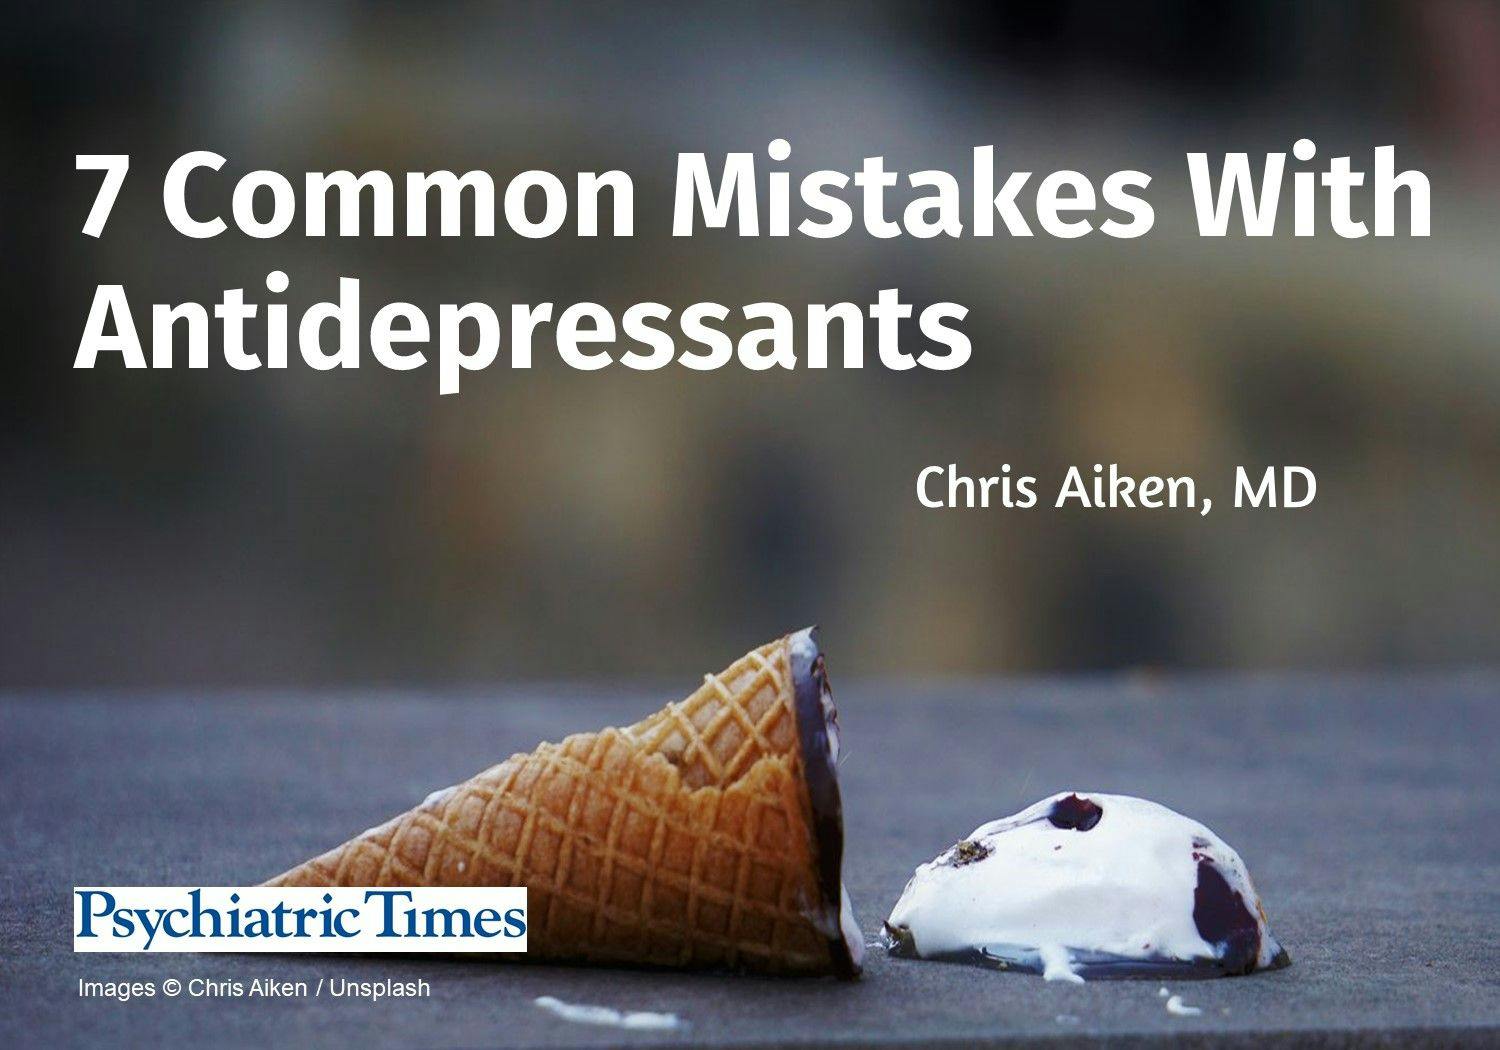 7 Common Mistakes With Antidepressants